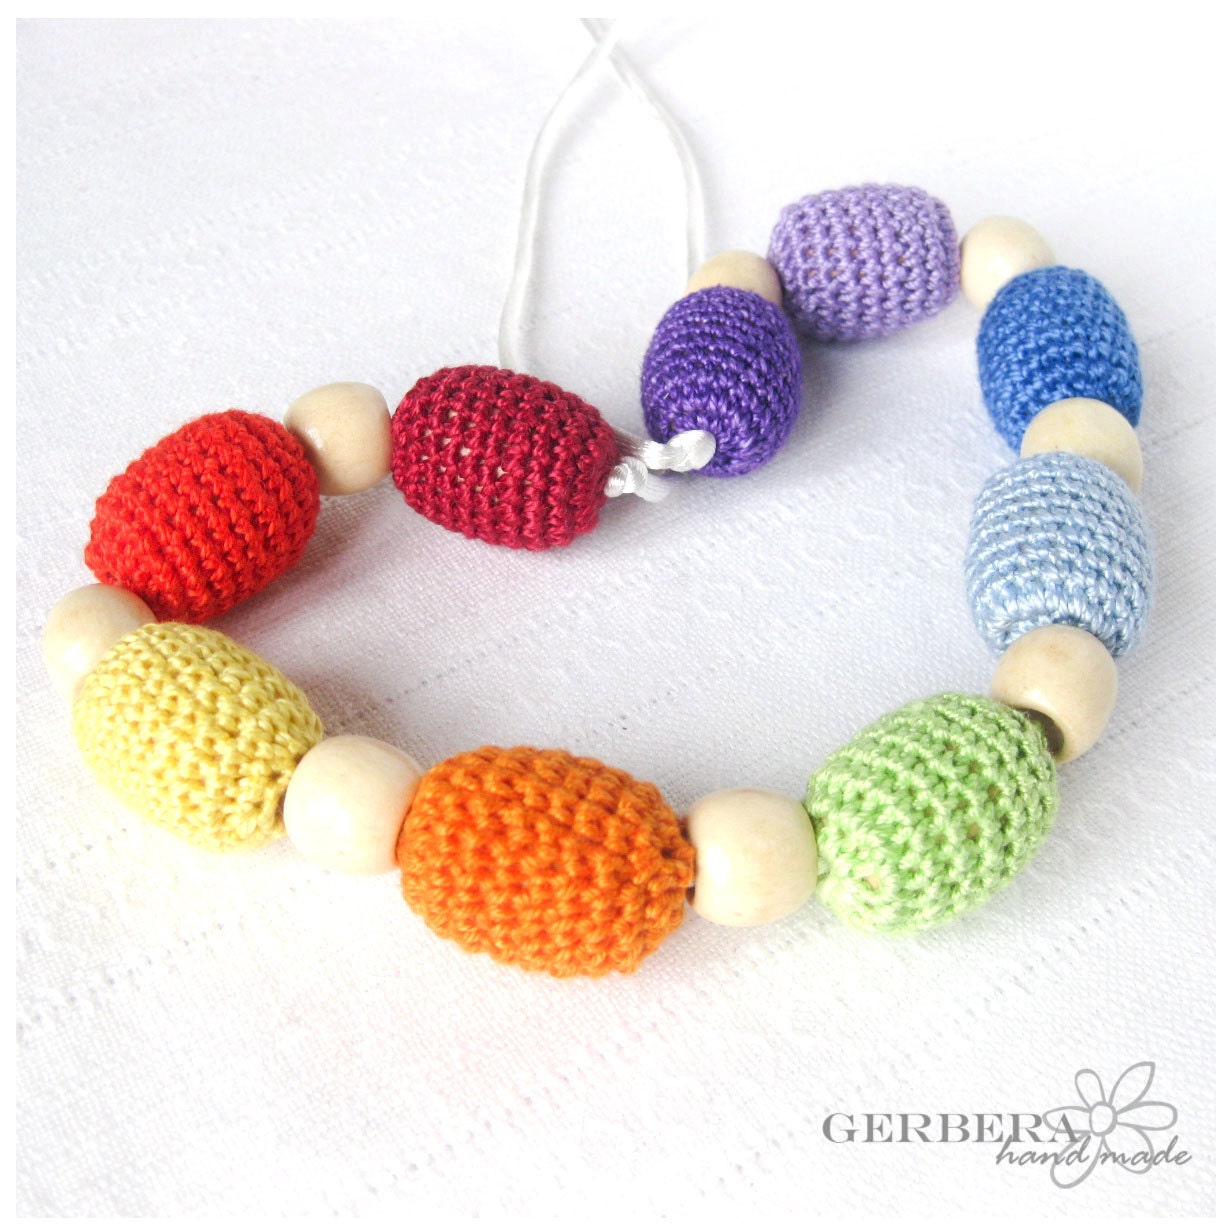 Nursing necklace/ Teething necklace for Mom to Wear and baby -rainbow colors 100% cotton wood beads